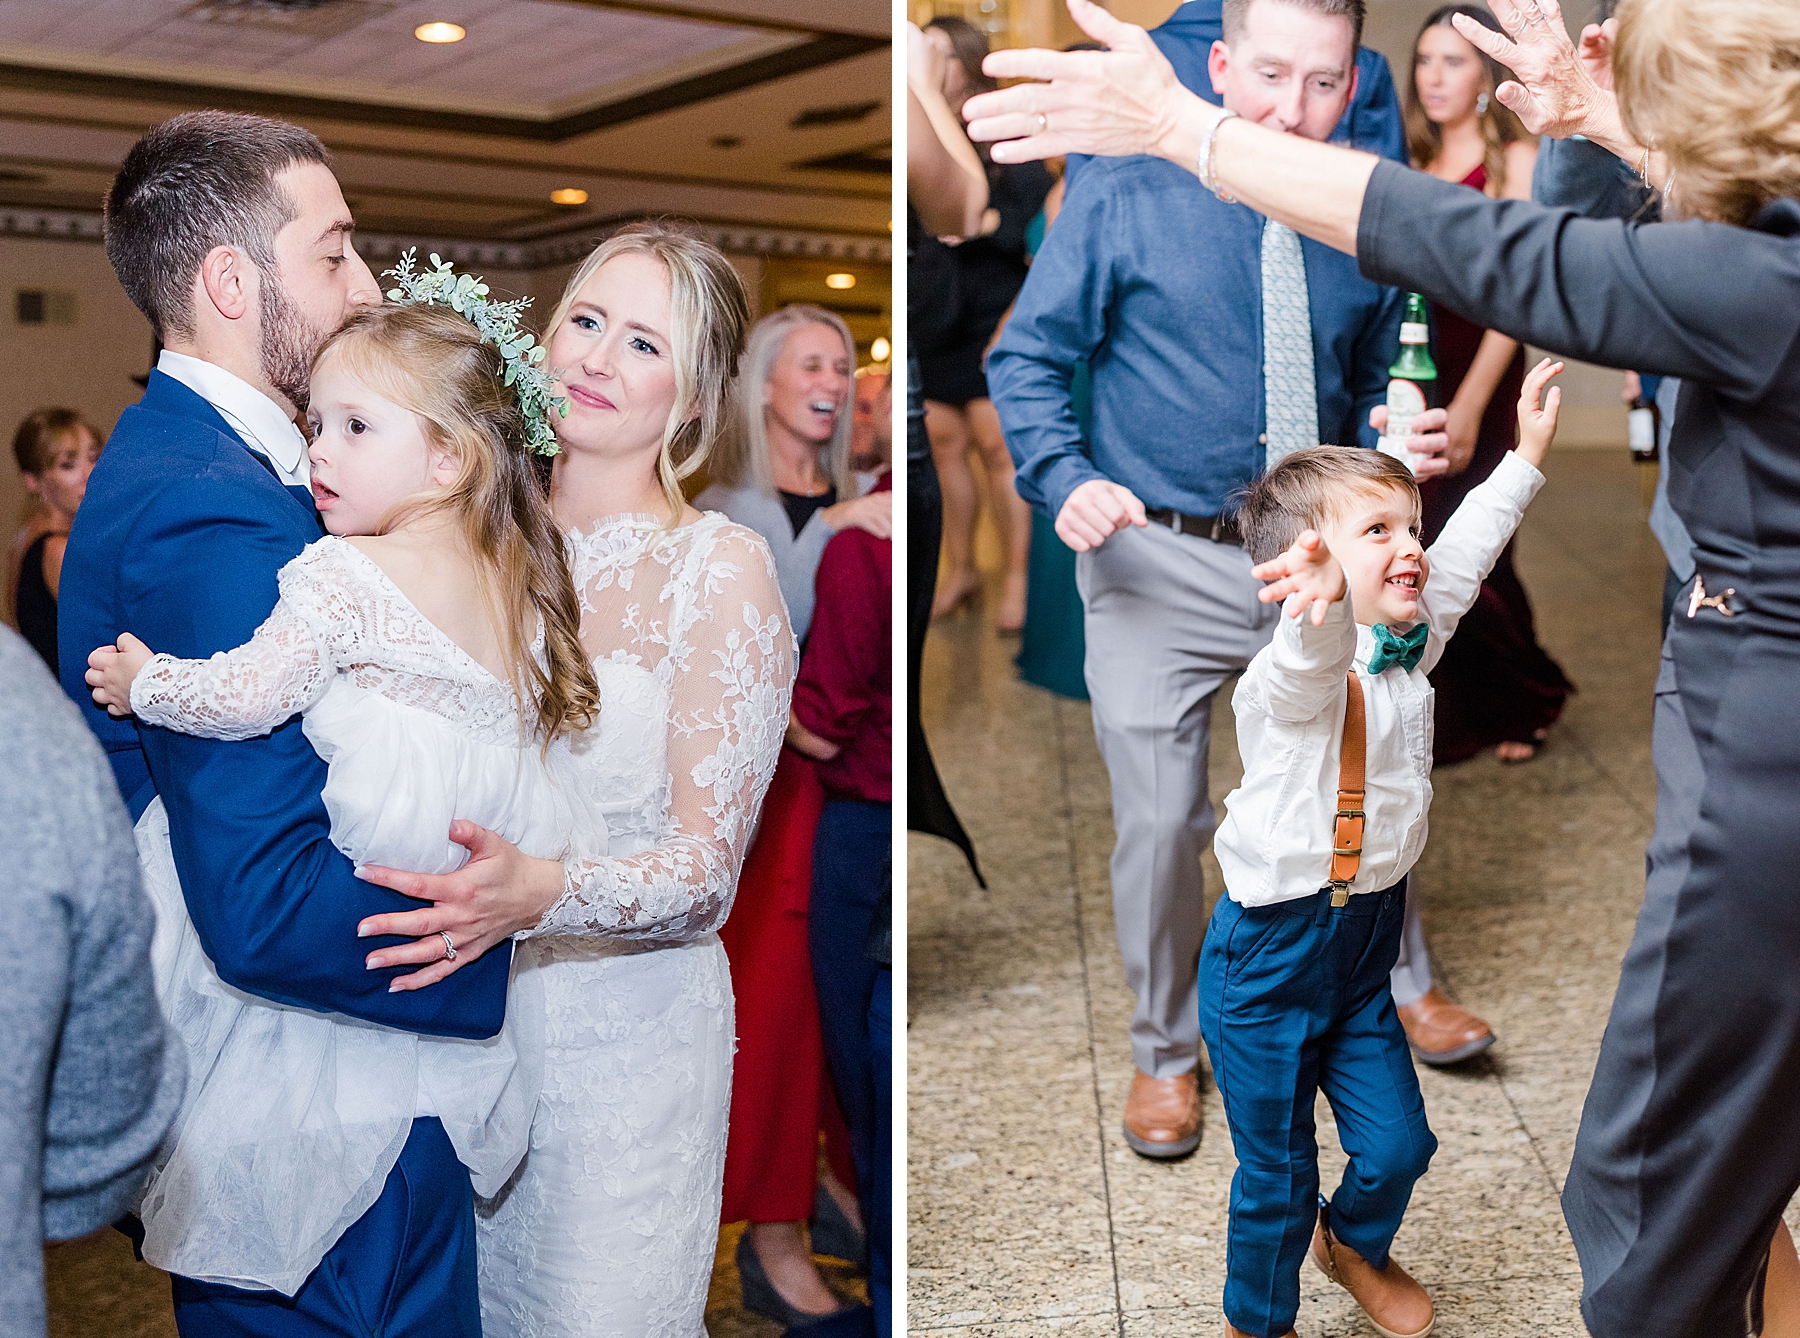 newlyweds dance with their kids at wedding reception 